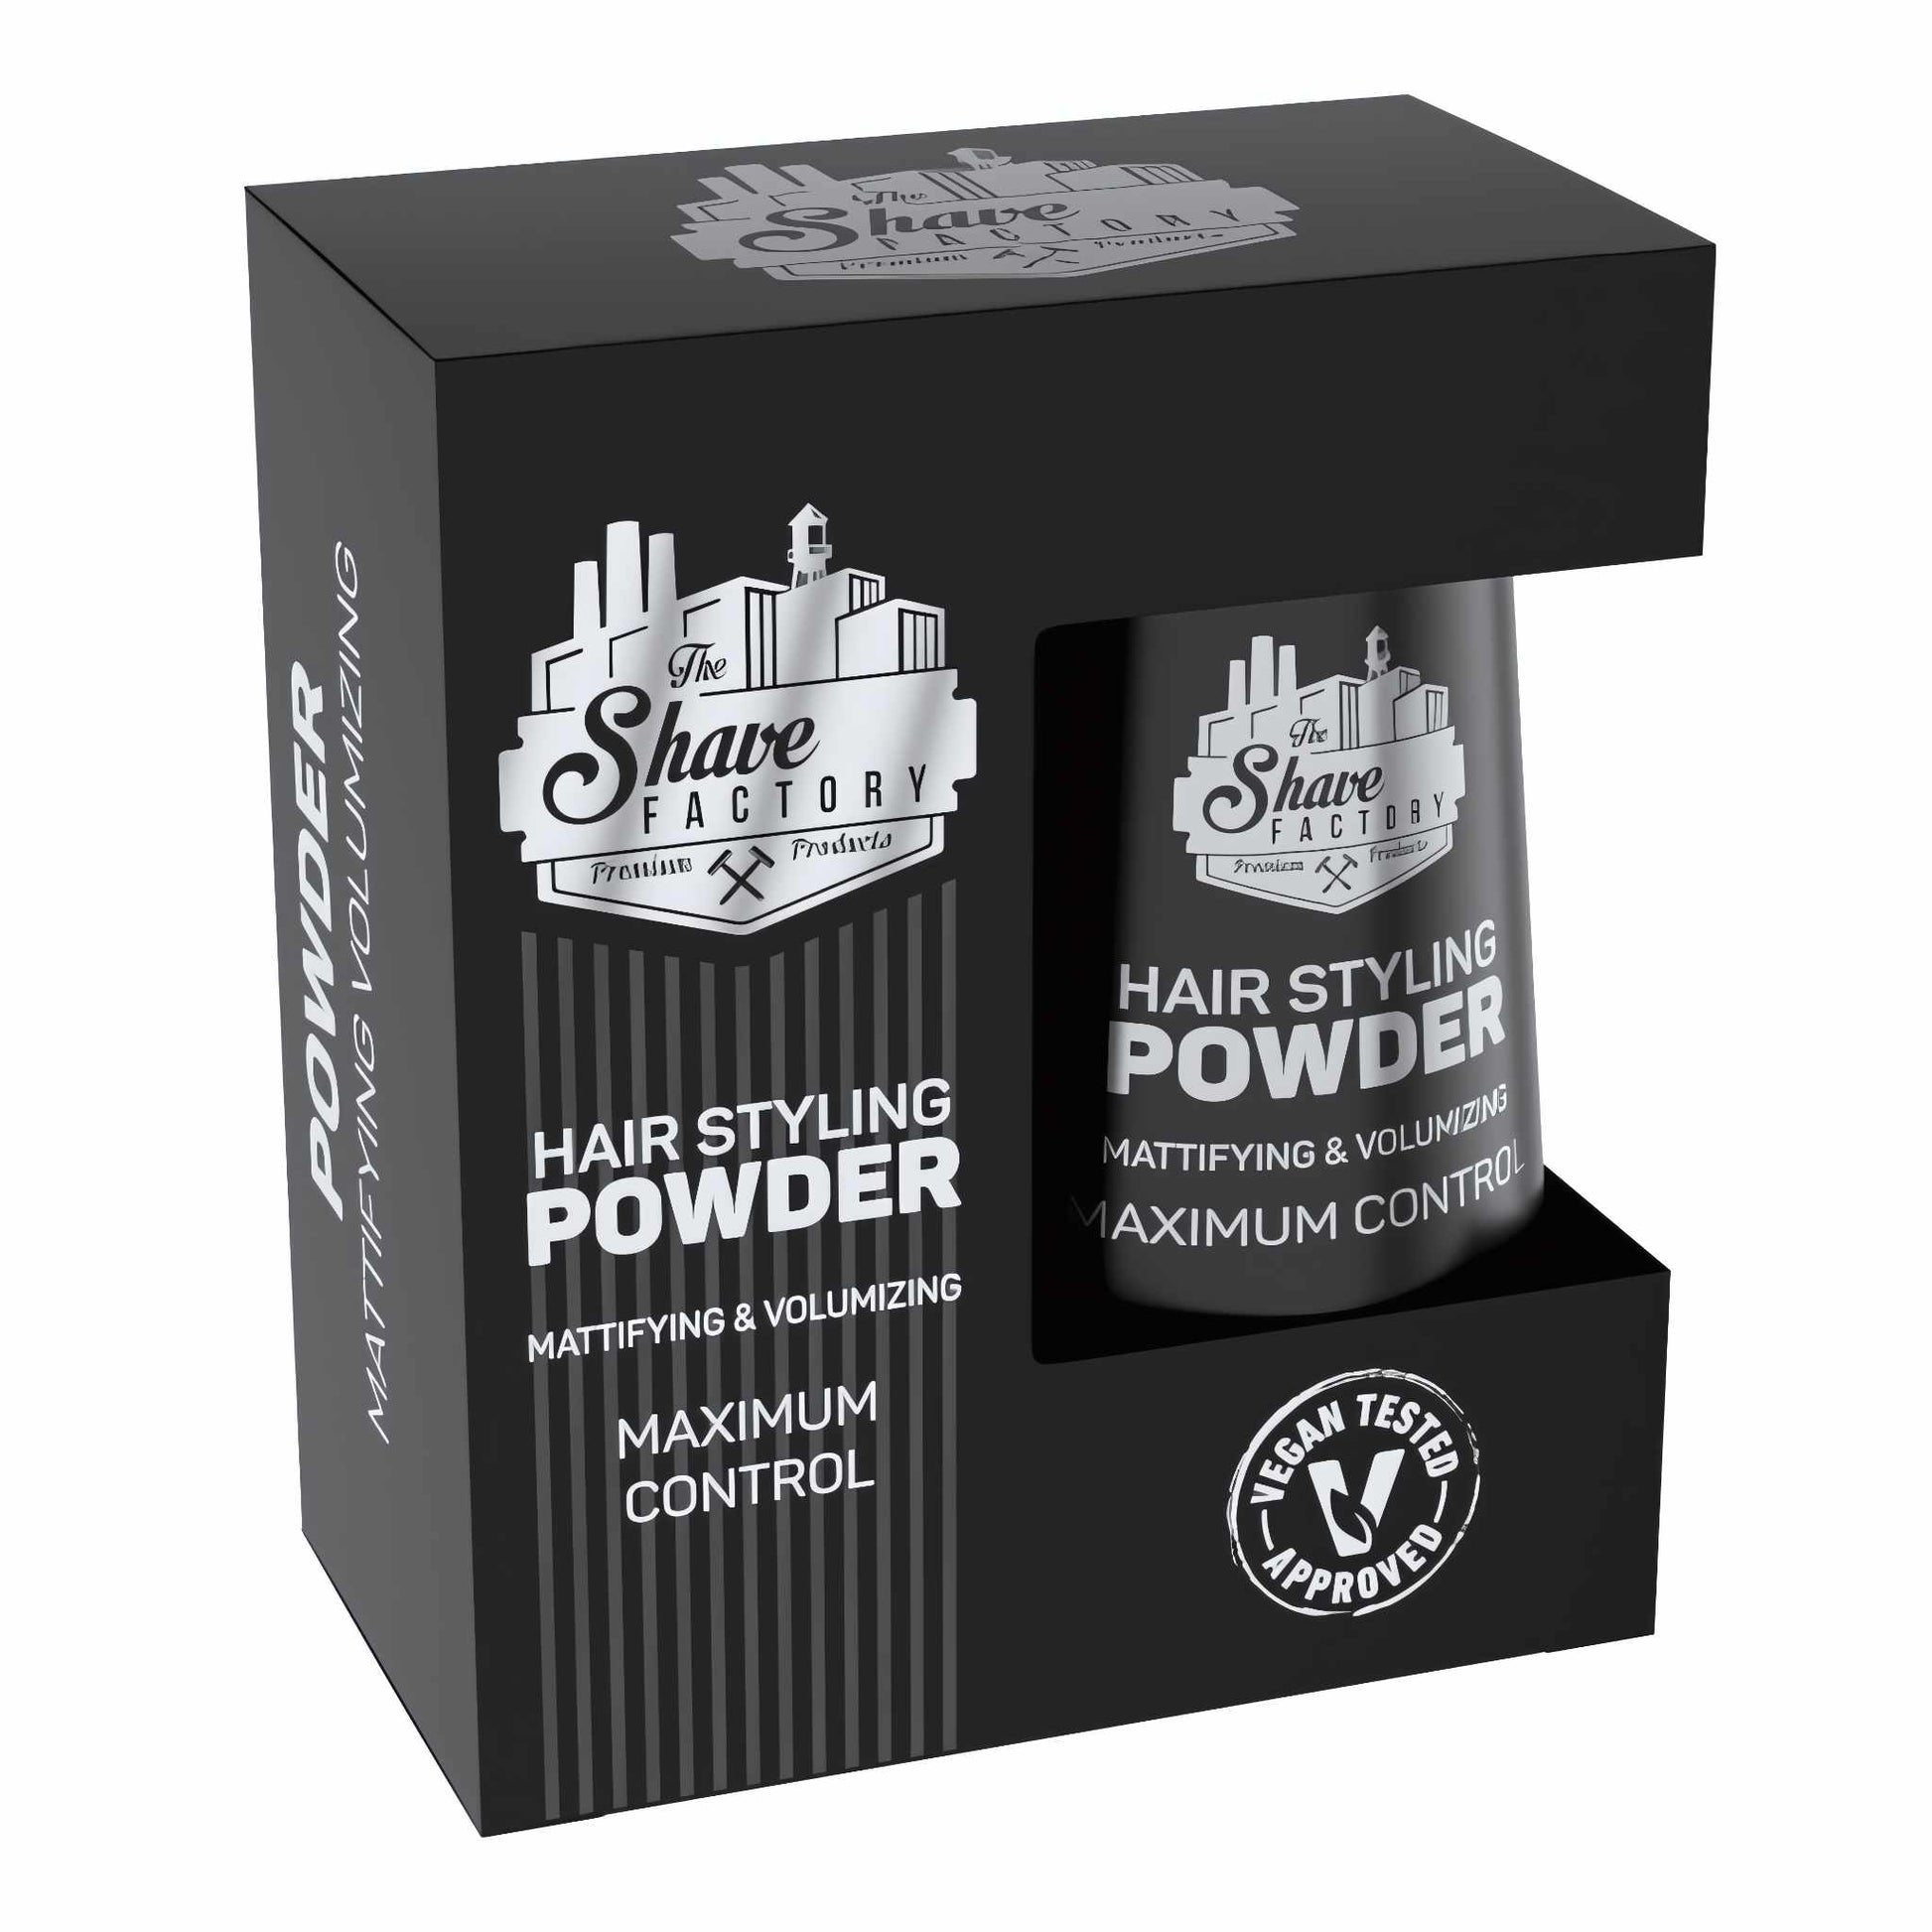 The Shave Factory Hair Styling Volume Powder Maximum Control 20 gr in packaging